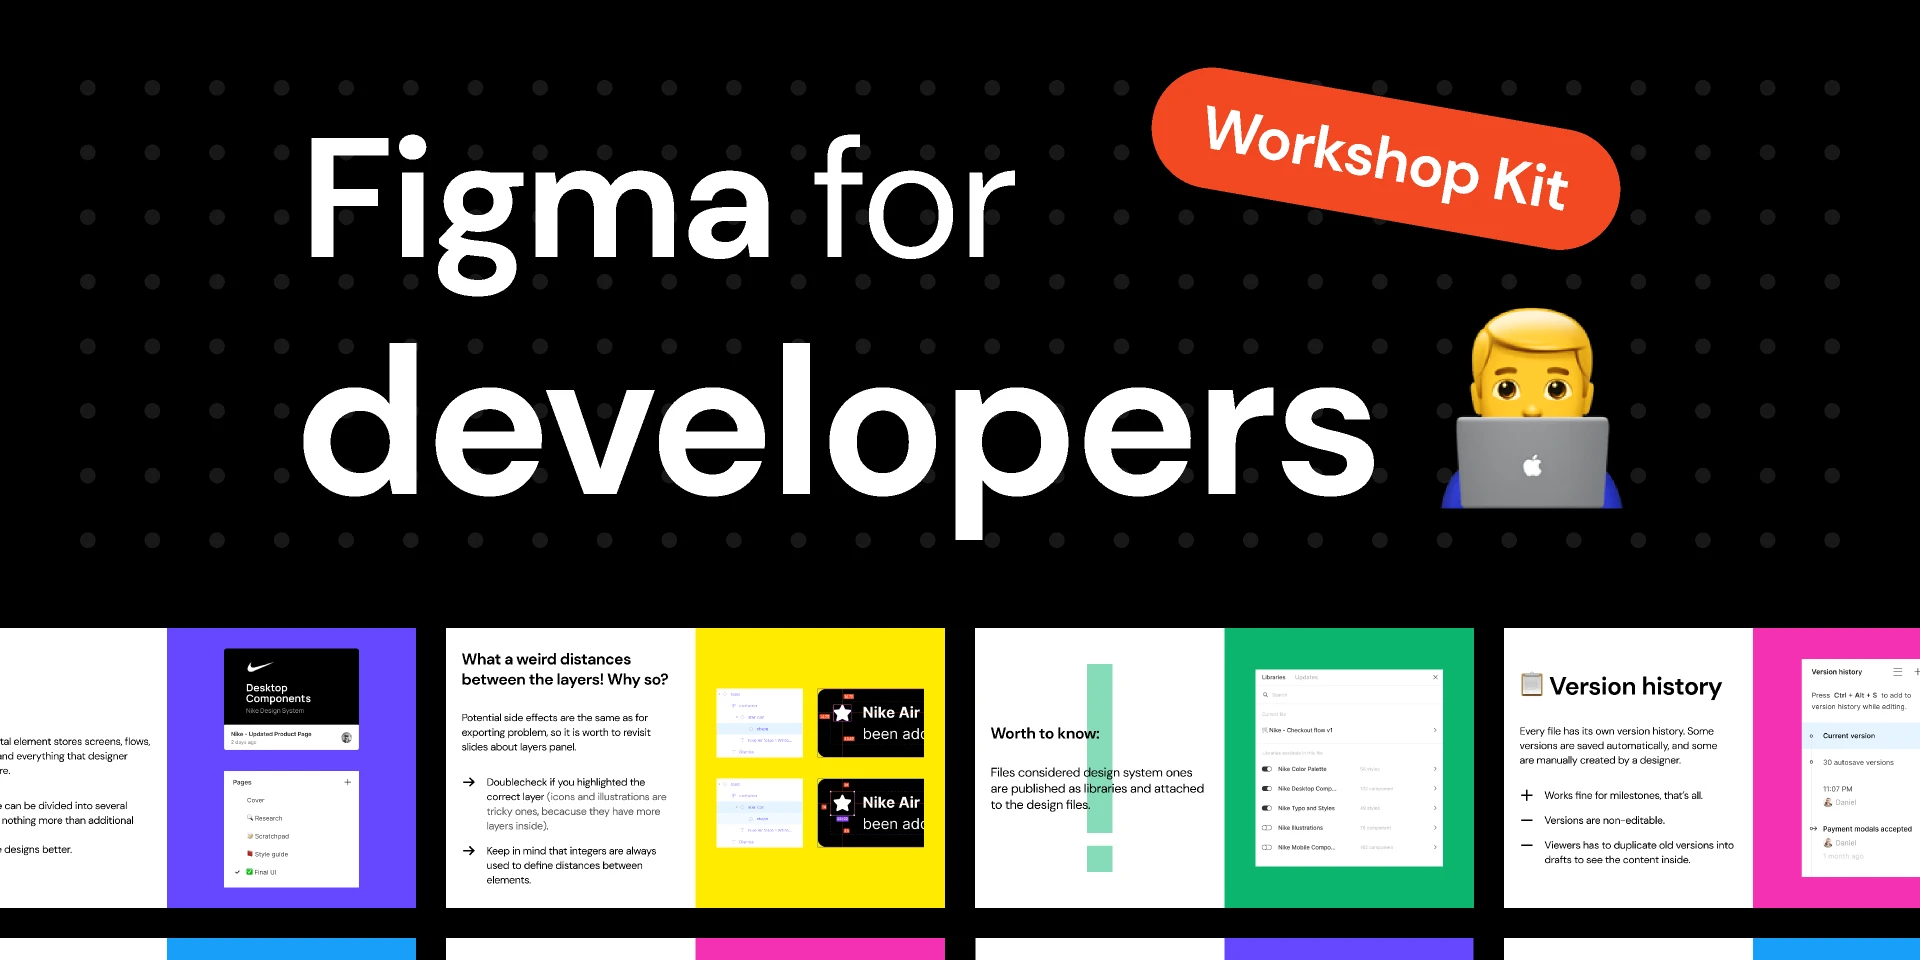 Figma for developers  - Ebook & Workshop Kit for Figma and Adobe XD